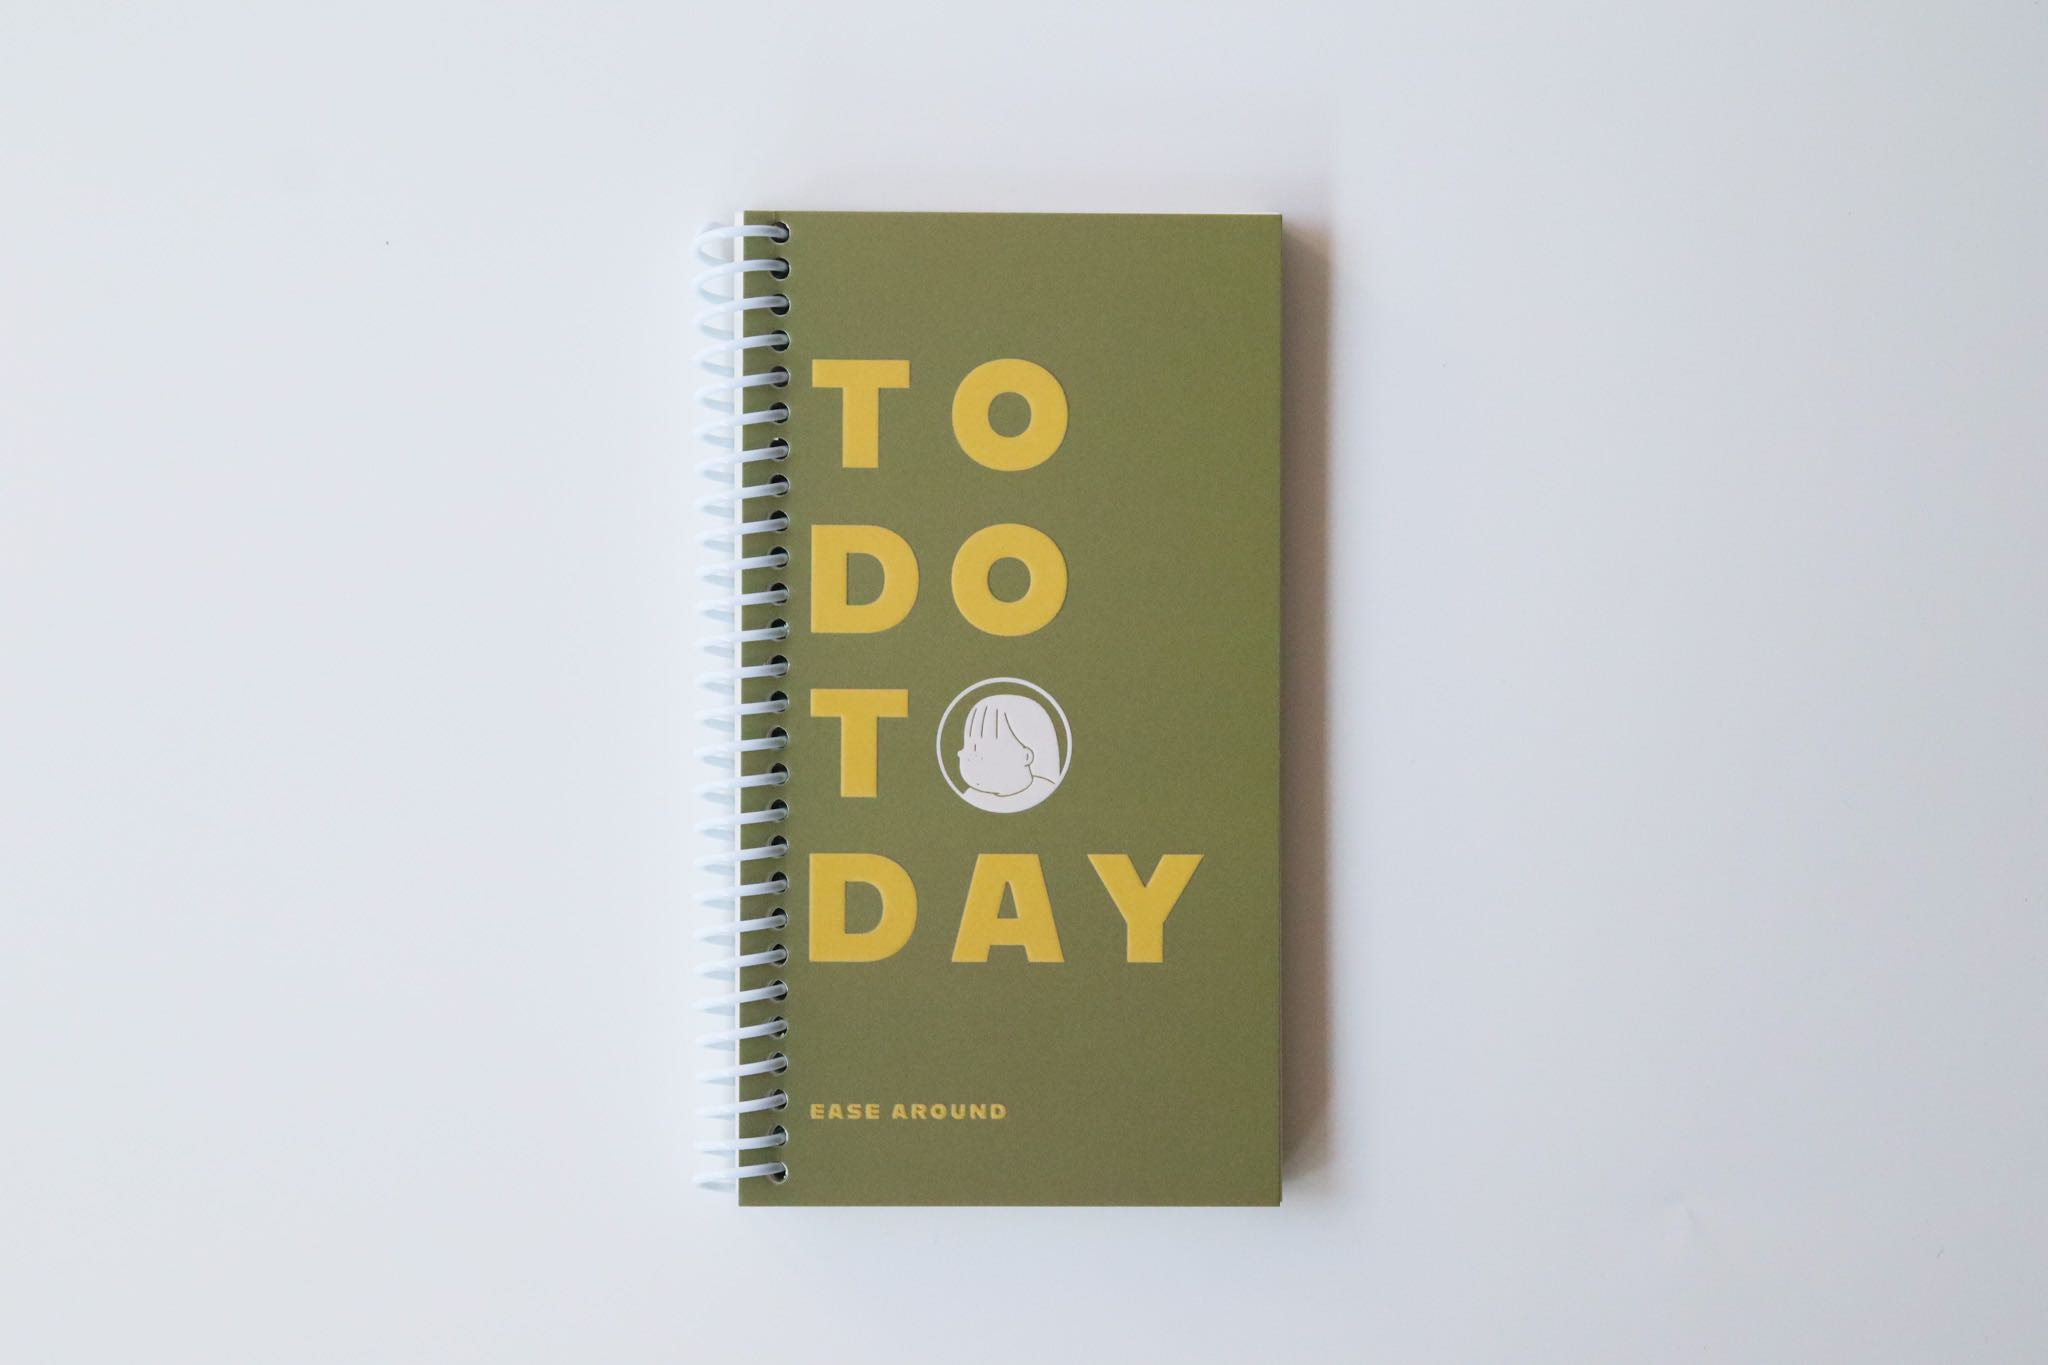 TO DO TODAY 03